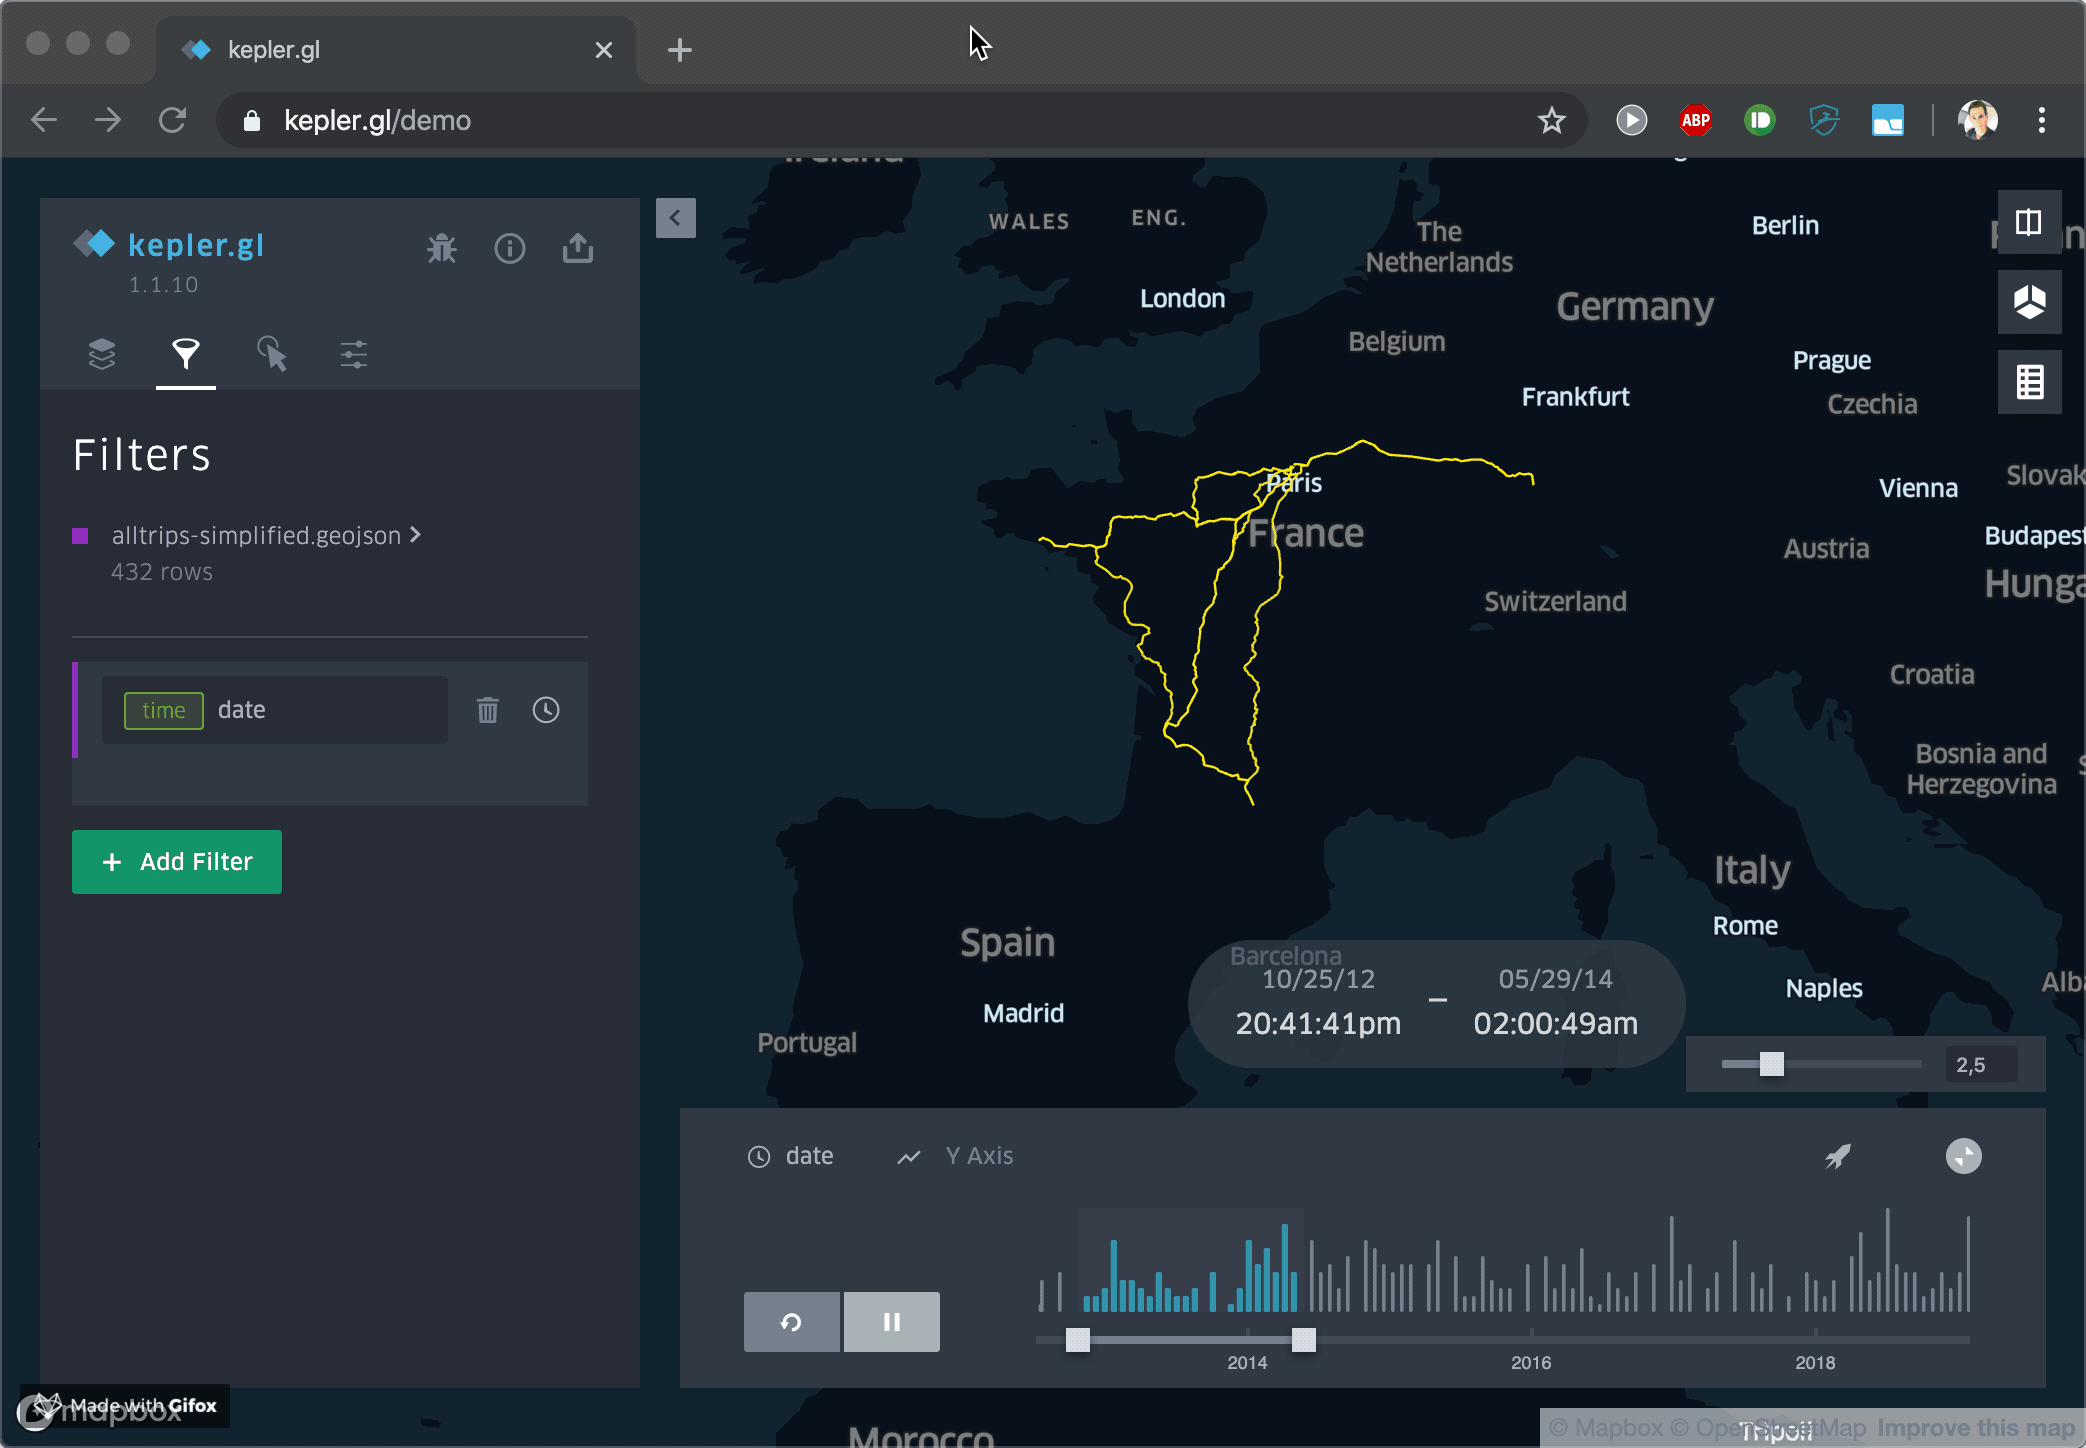 Animation of my trips on a European map changing over the years.